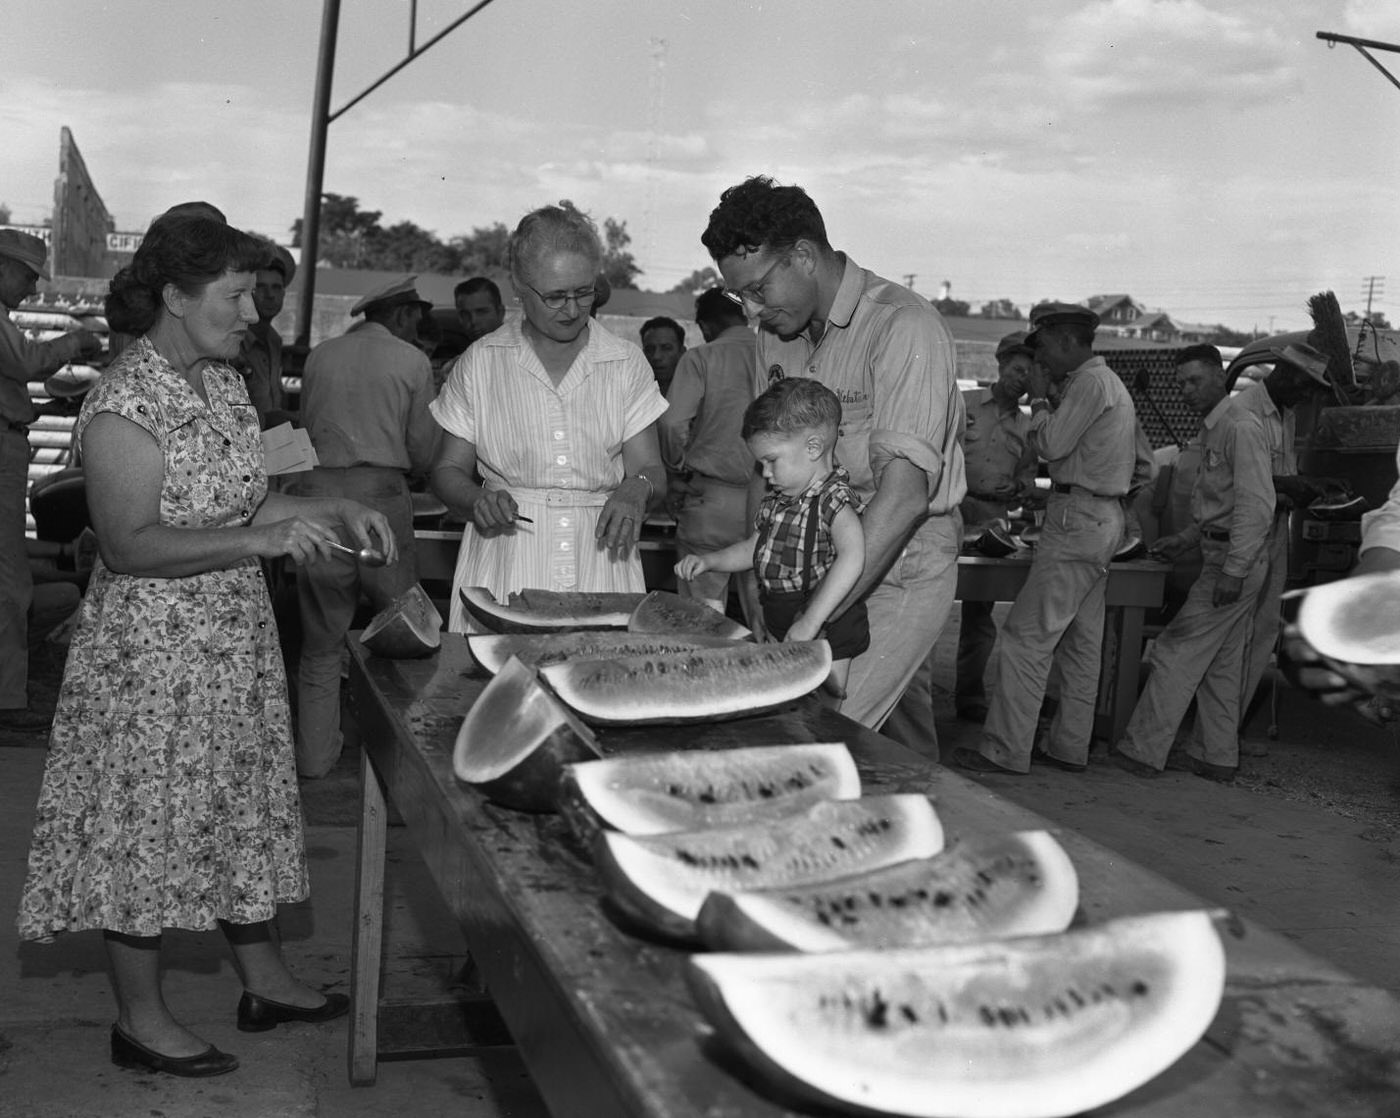 Picnic Goers Inspecting Watermelons, 1957.